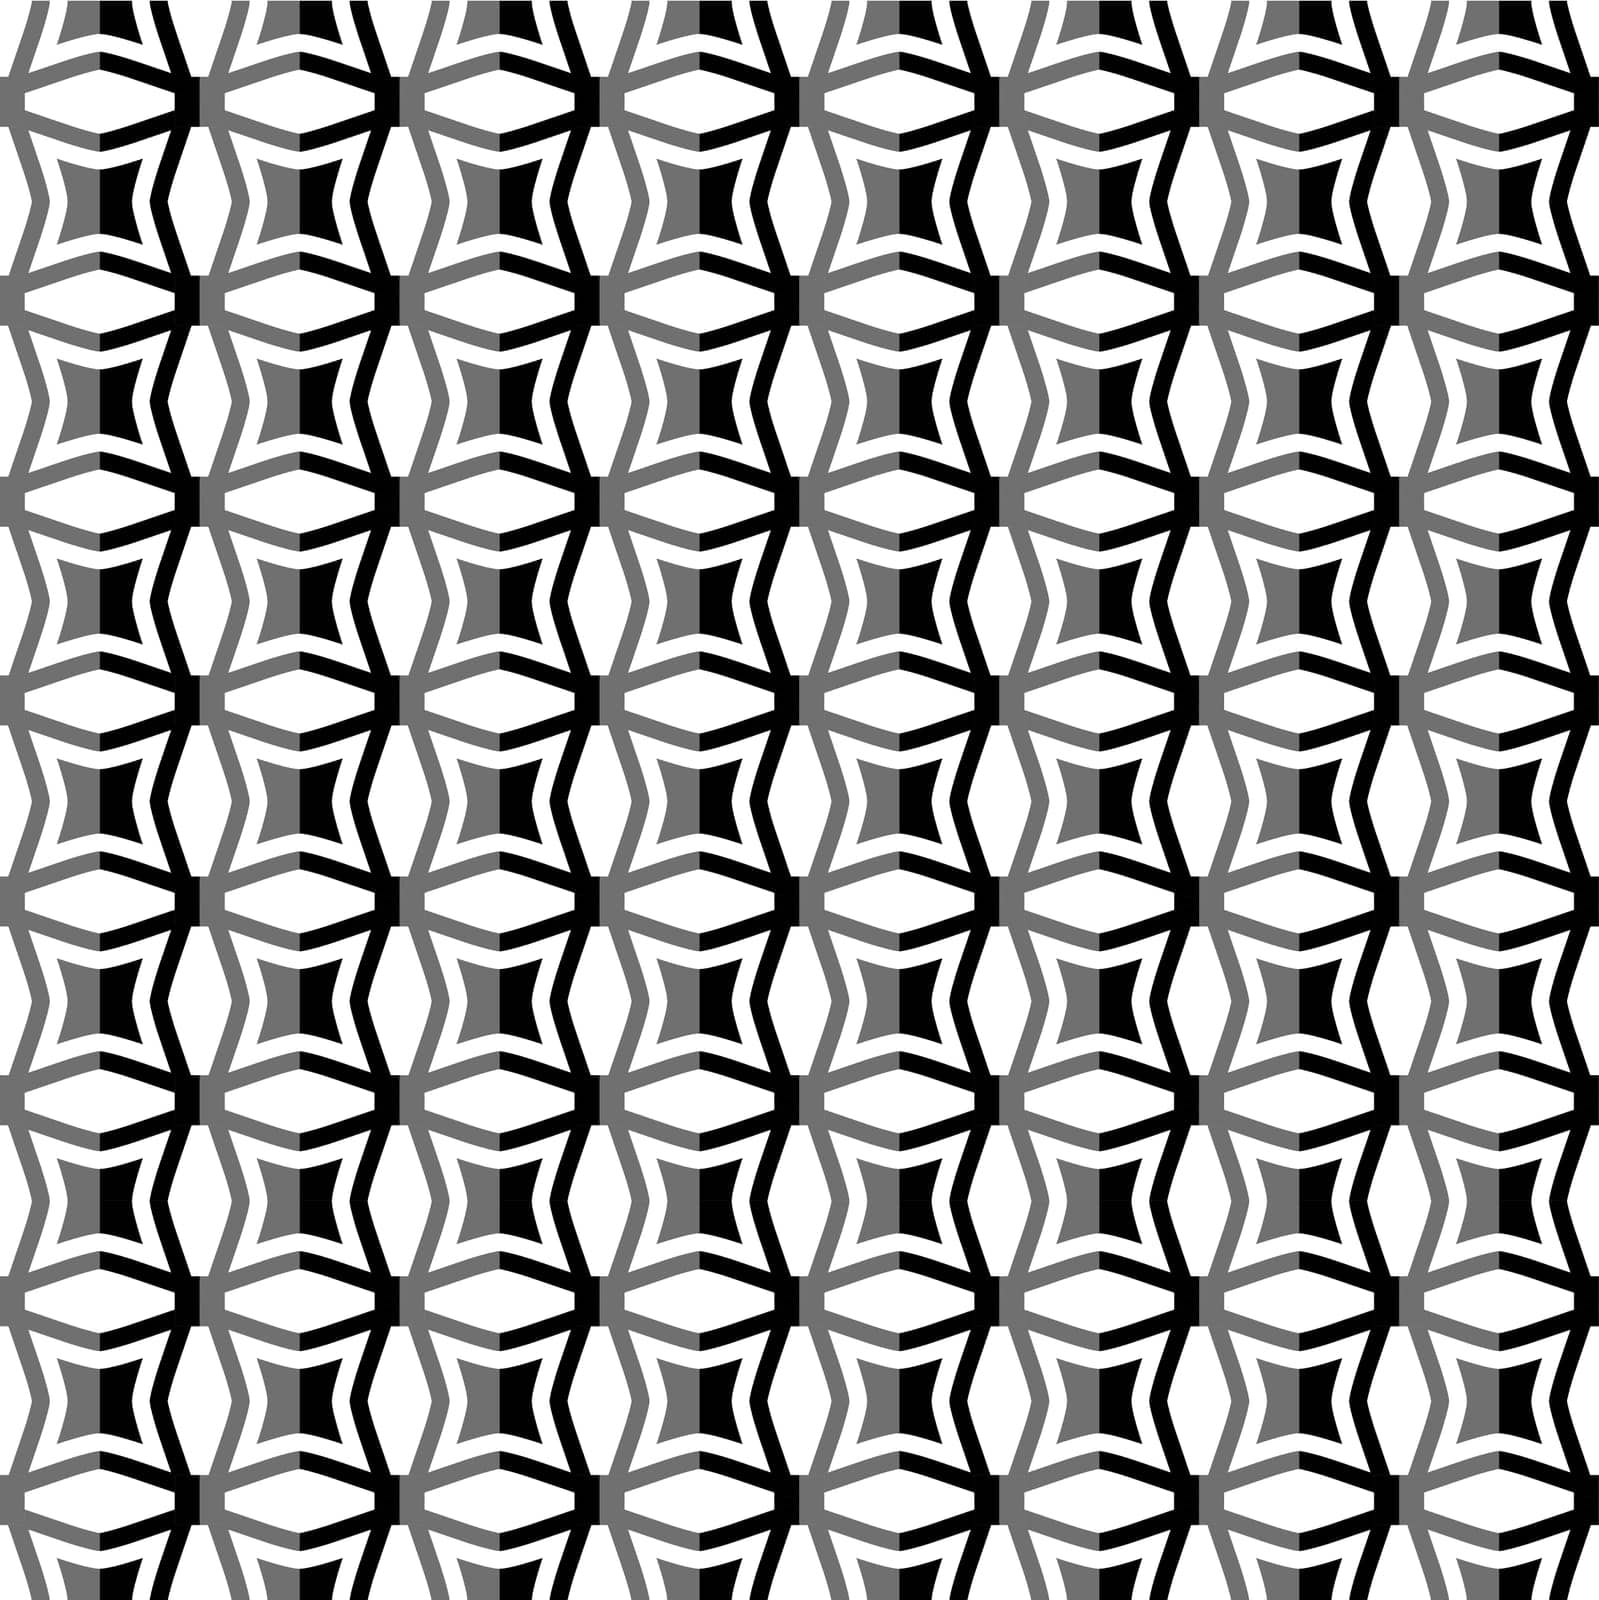 Abstract seamless pattern. Black quadrilateral on white background. Vector illustration by Olechka